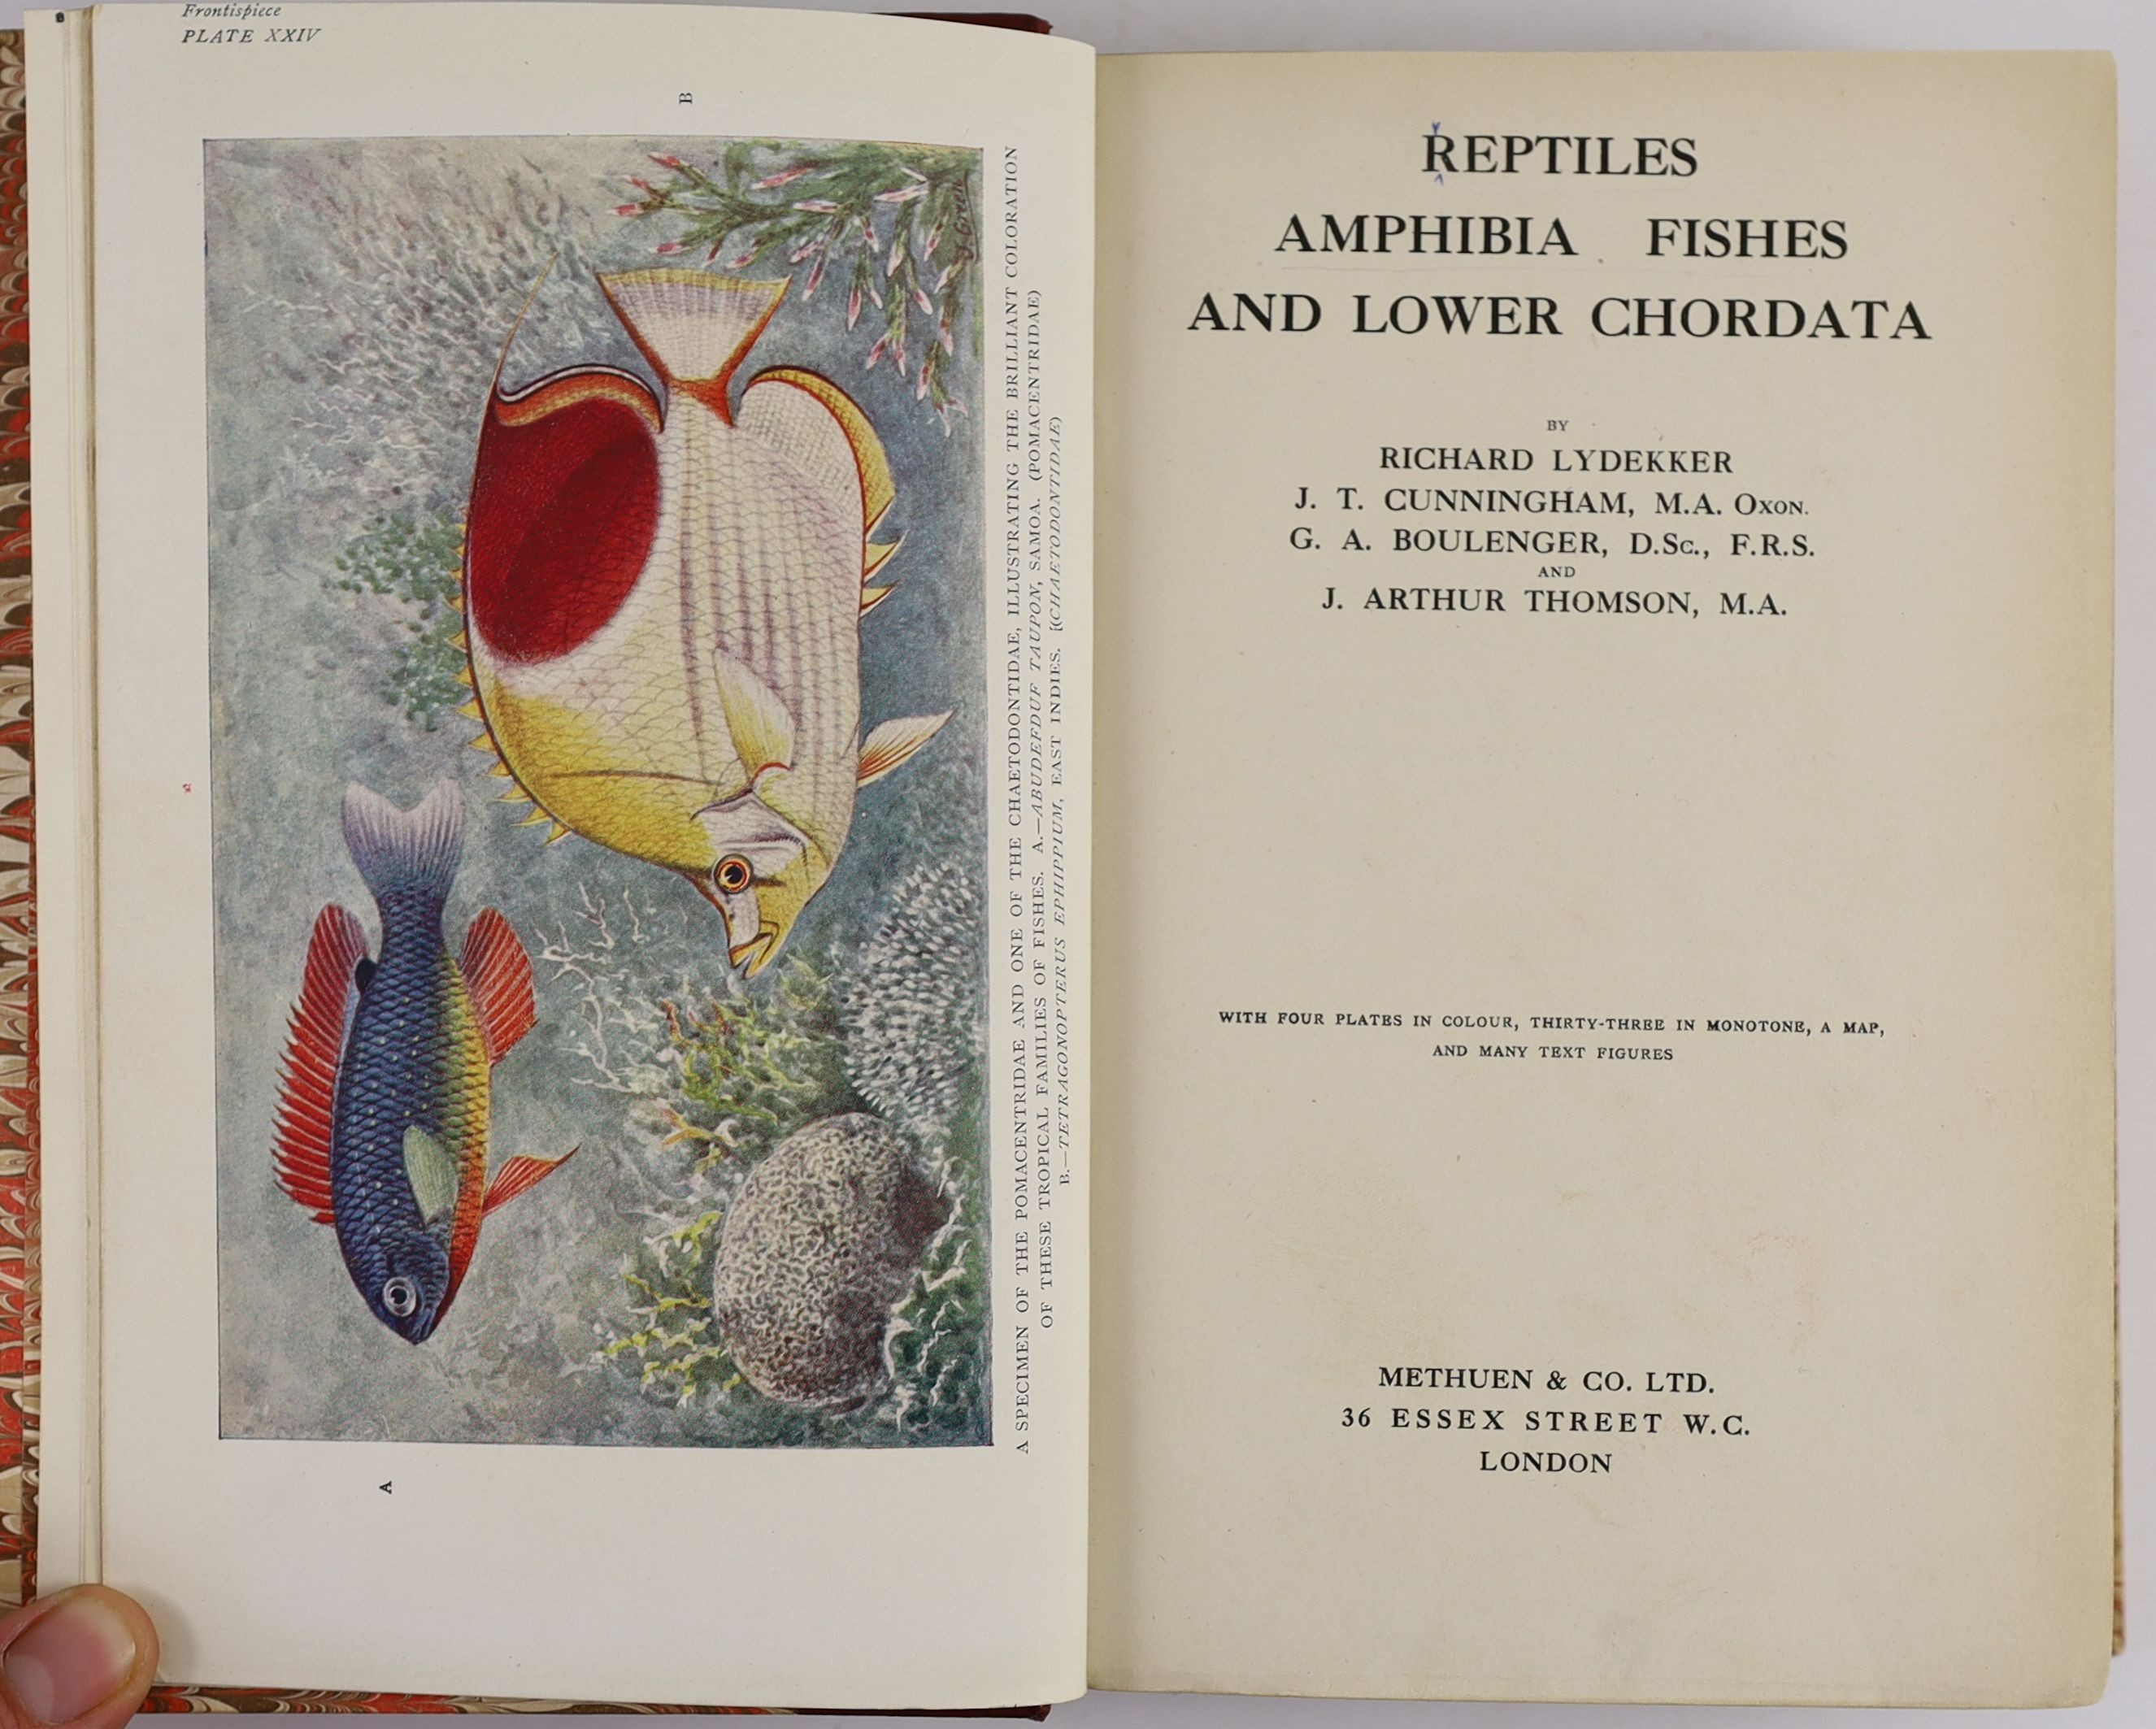 Fishing interest - Ronalds, Alfred - Fly-Fisher’s Entomology, 3rd edition, 8vo, quarter green morocco and green cloth, with 20 hand-coloured plates, A. Courtney Williams copy, London, 1844; Hills, John Walker - A Summer